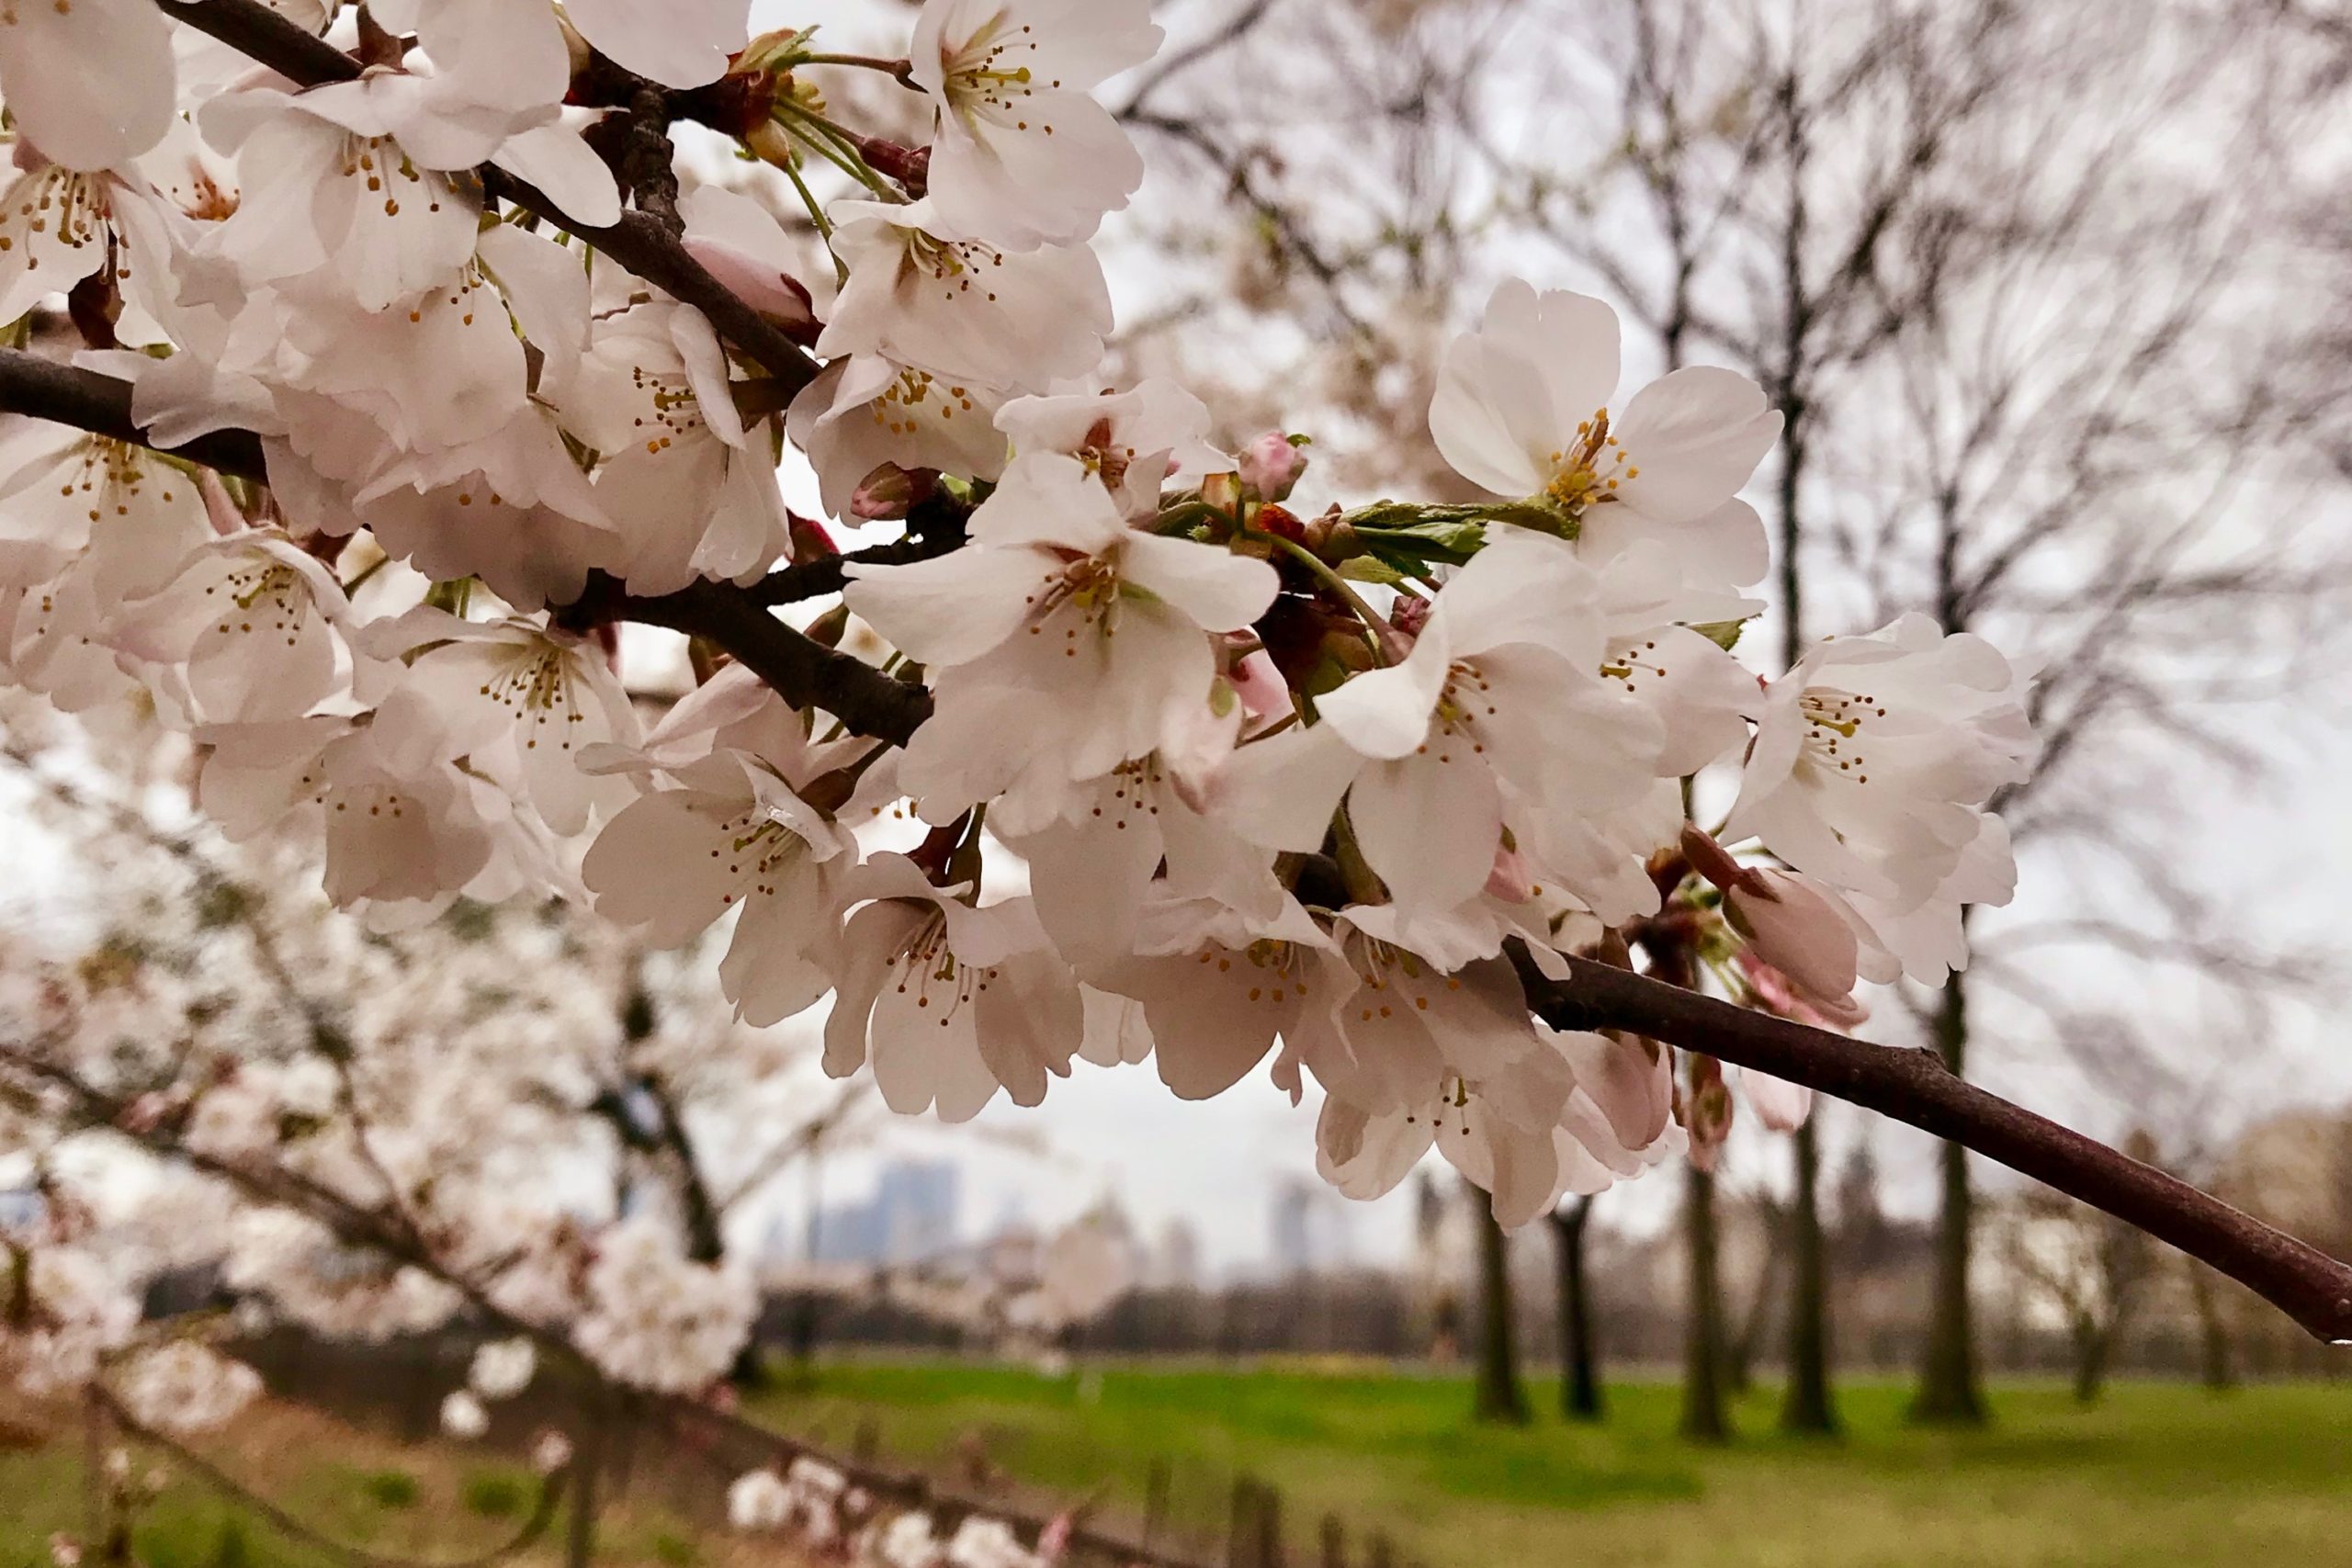 Central Park's Cherry Blossoms Bloom Guide 2022